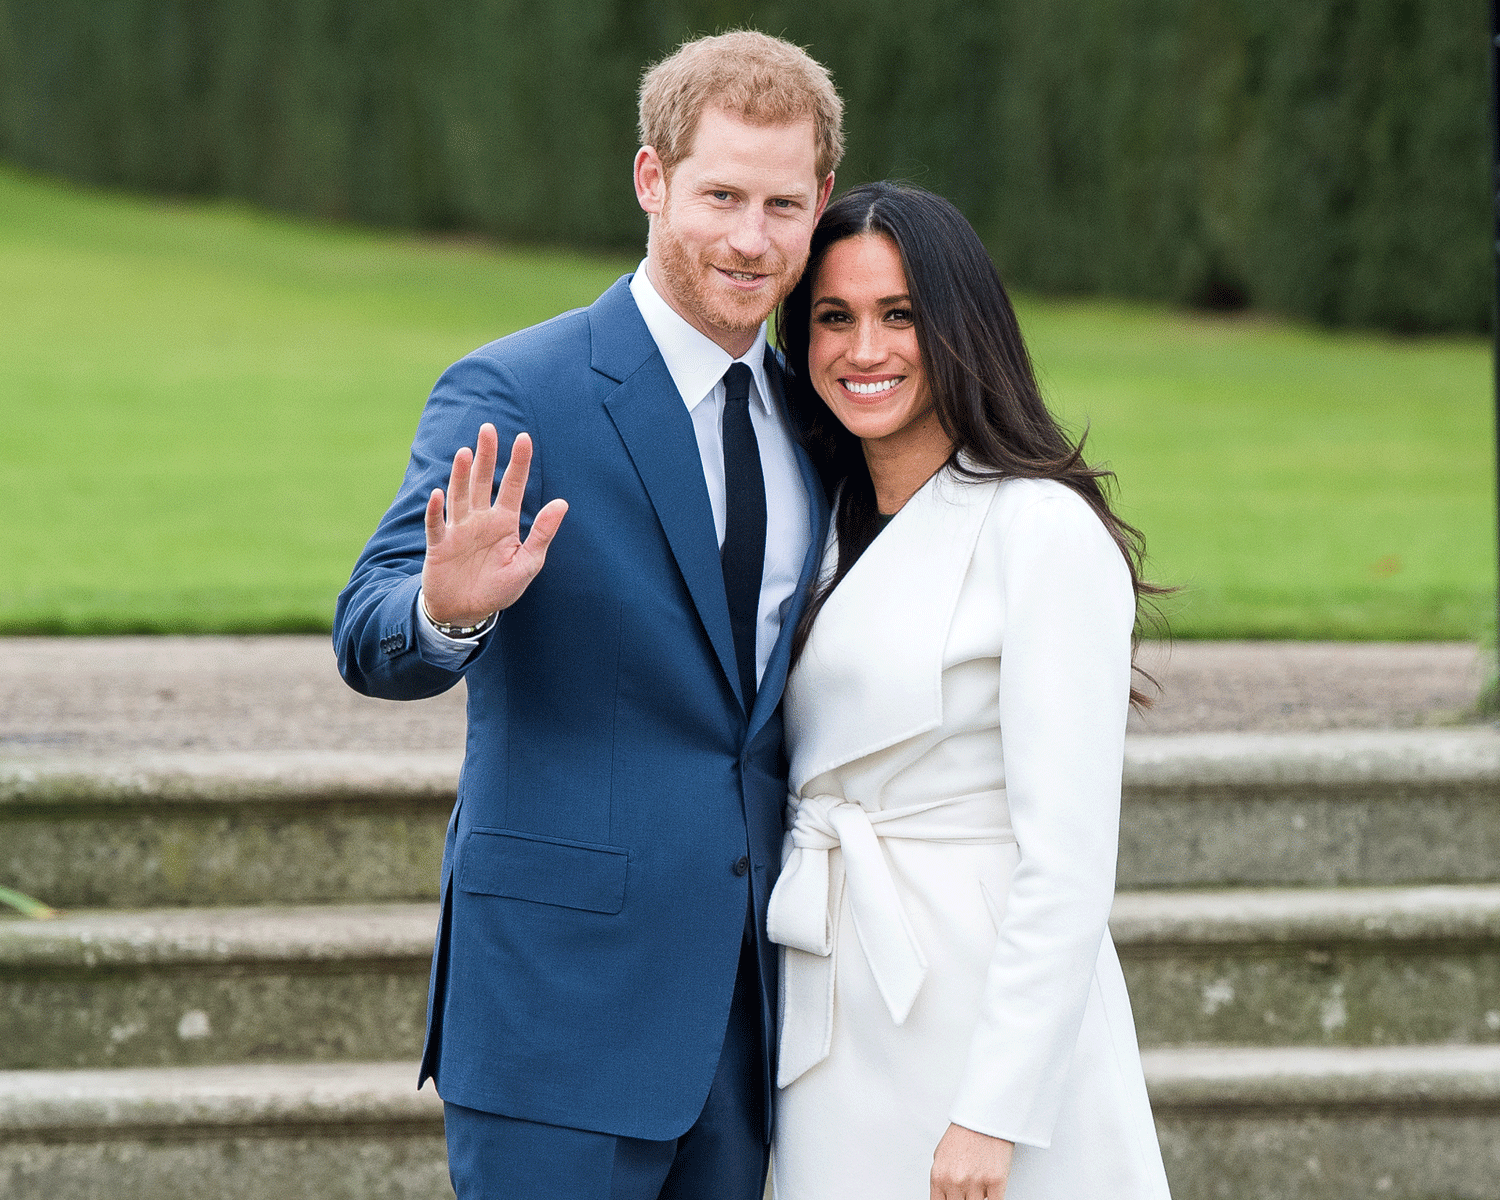 How To Celebrate Prince Harry And Meghan Markle's Royal Wedding